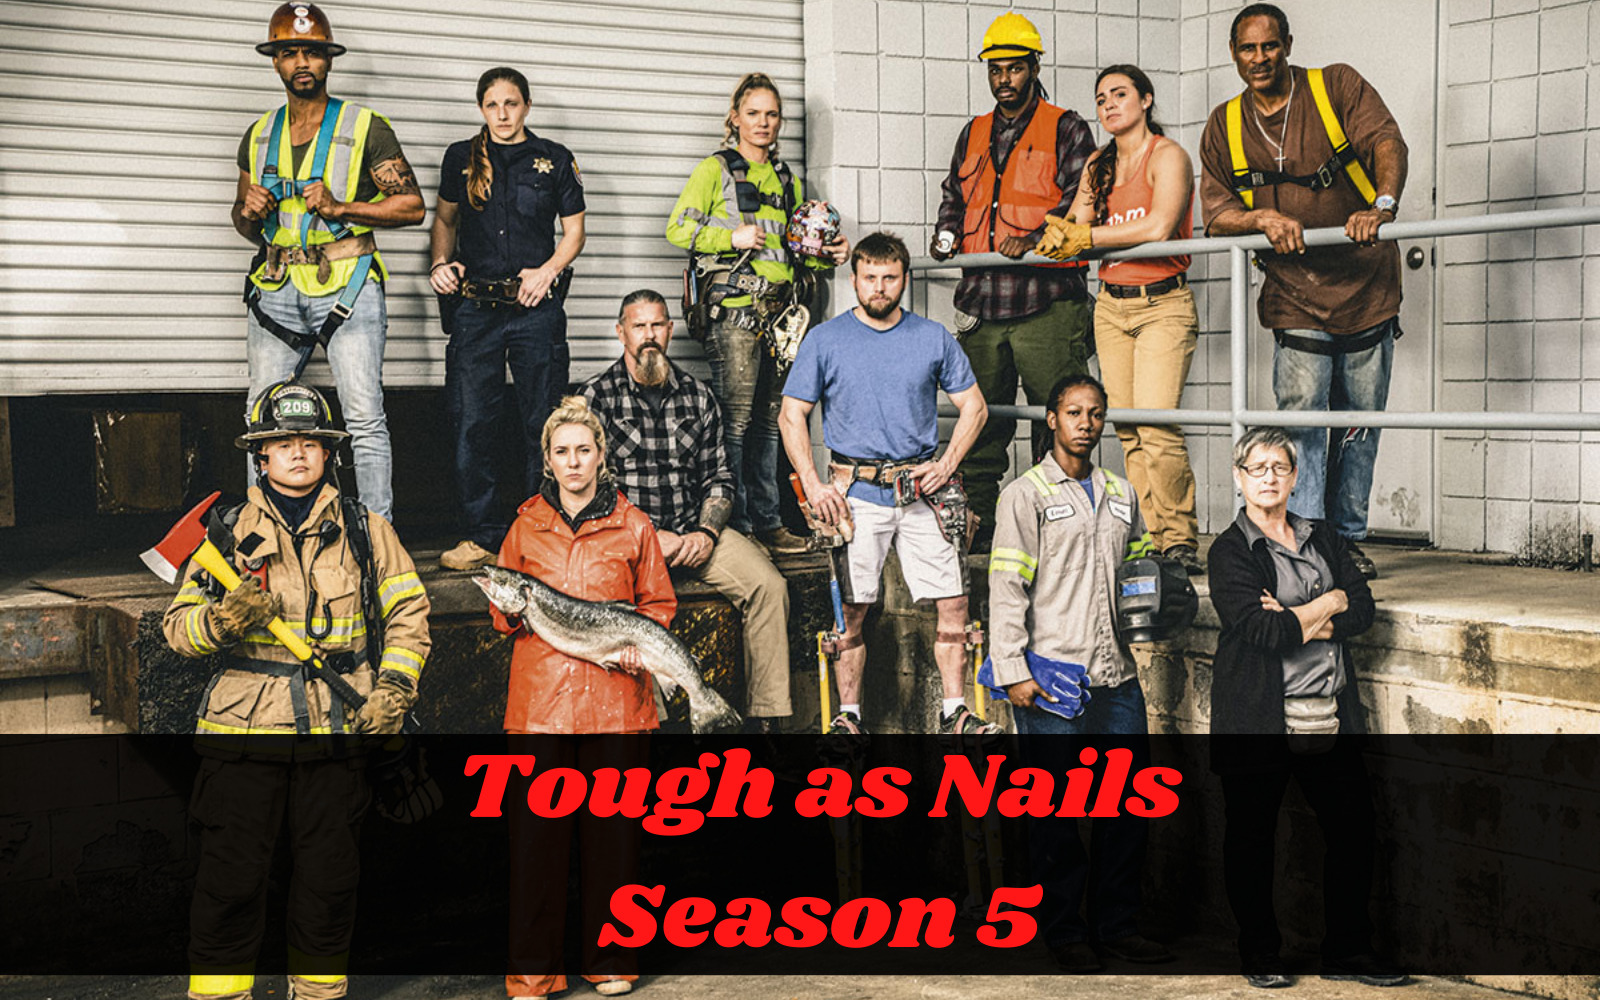 Is Tough as Nails Season 5 Renewed Or Cancelled? Tough as Nails Season